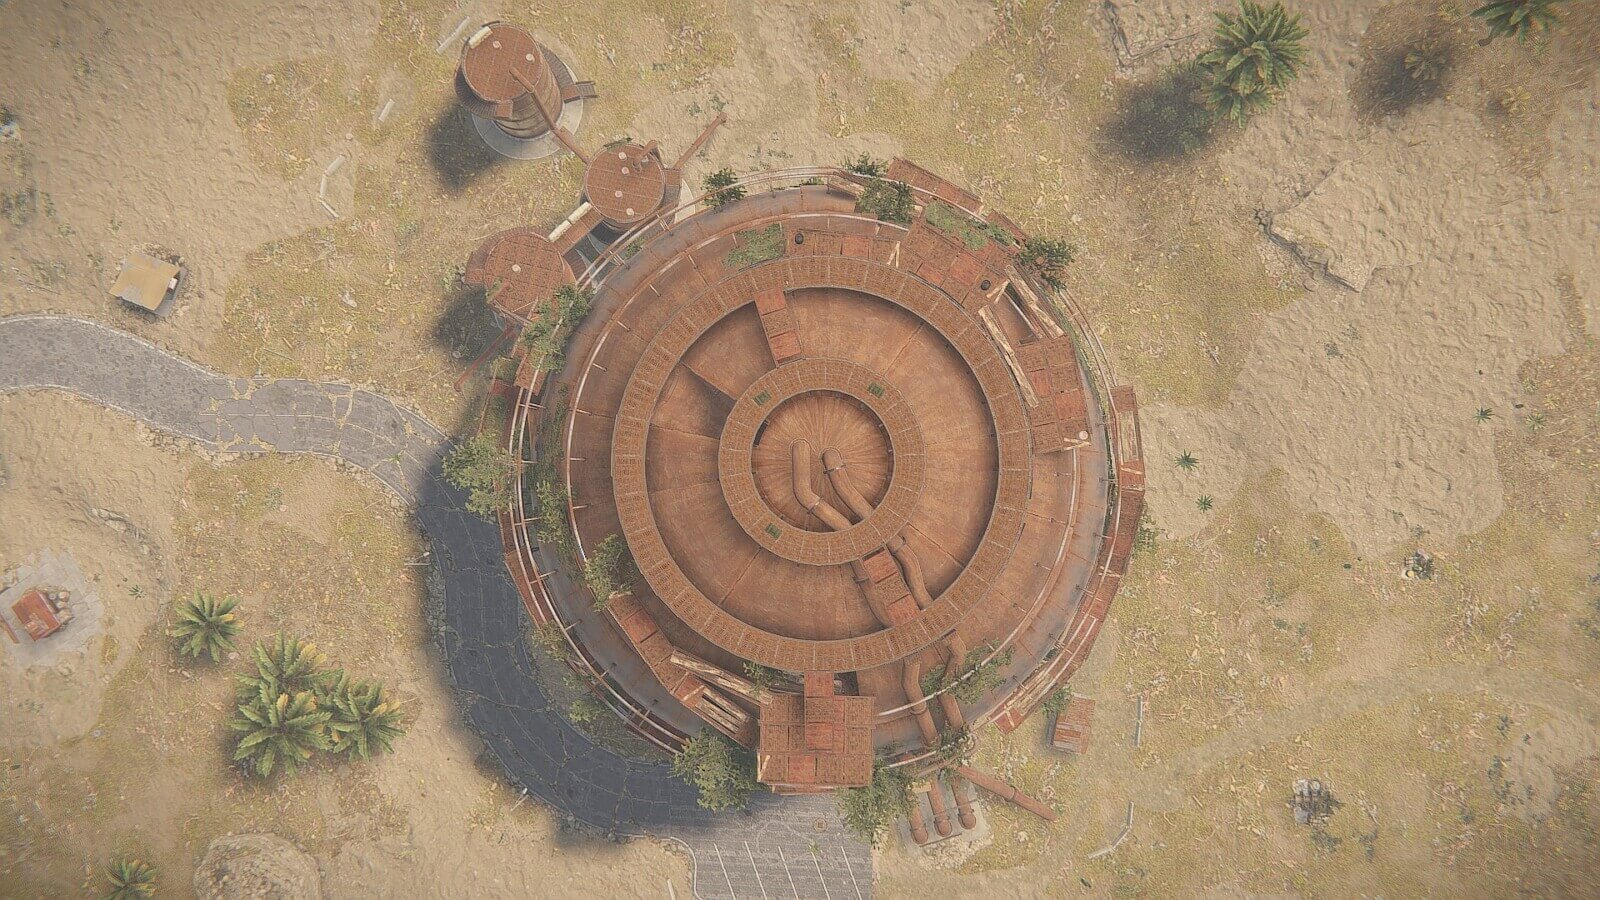 A top down view of the Rust sphere tank monument